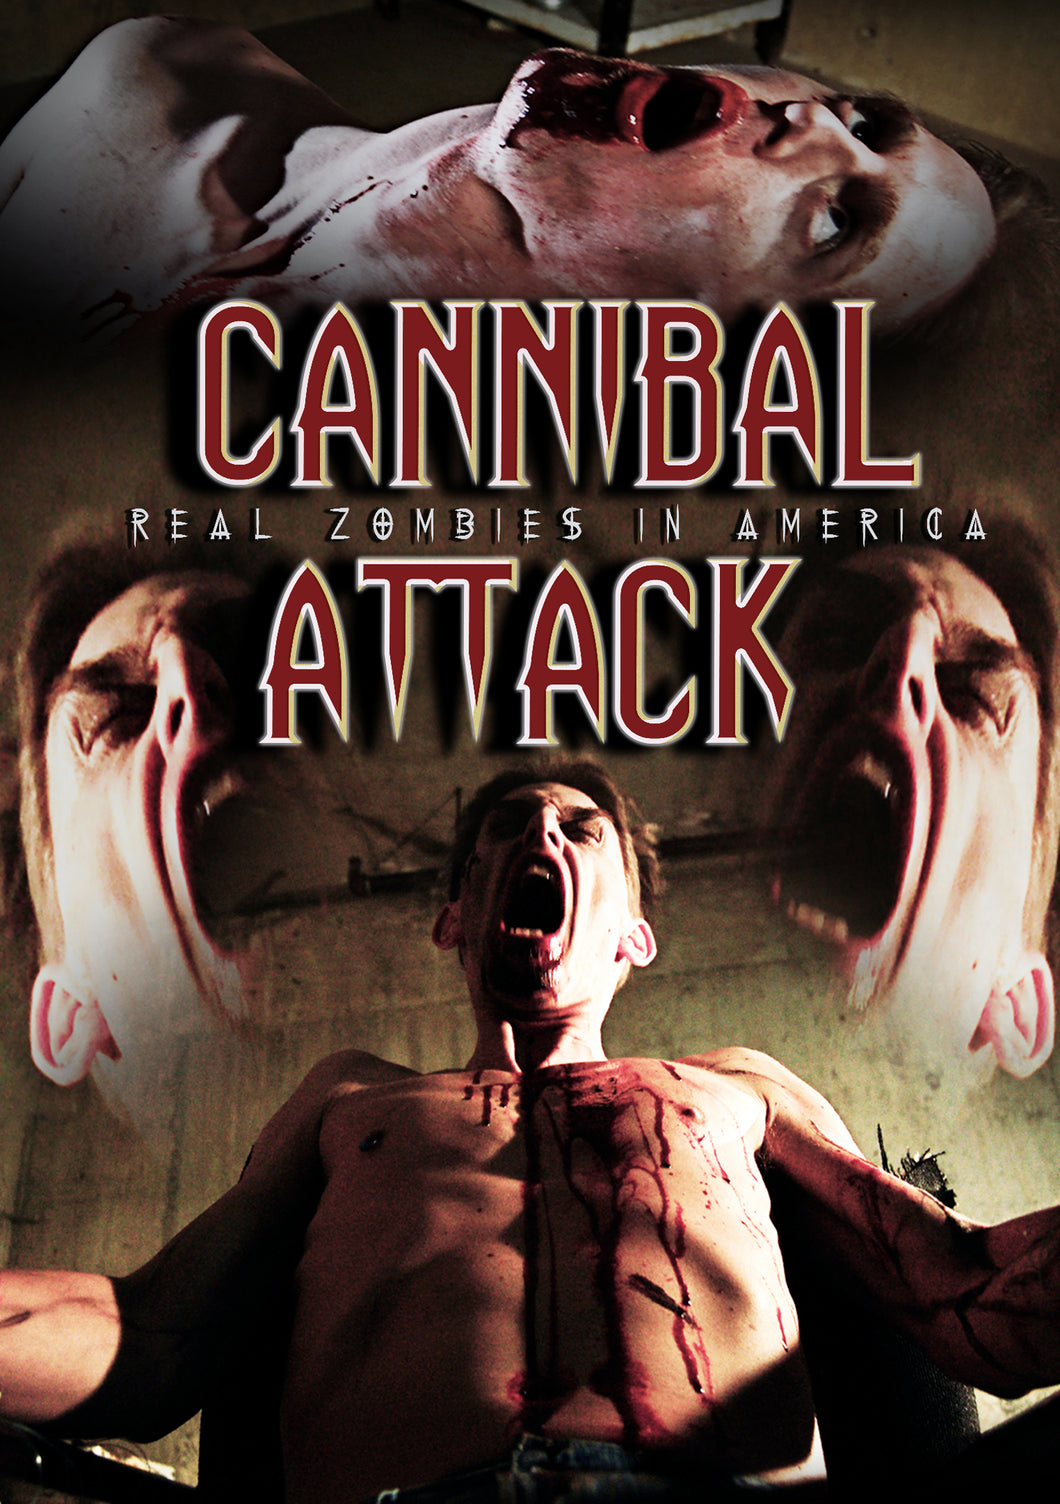 Cannibal Attack: Real Zombies In America (DVD)